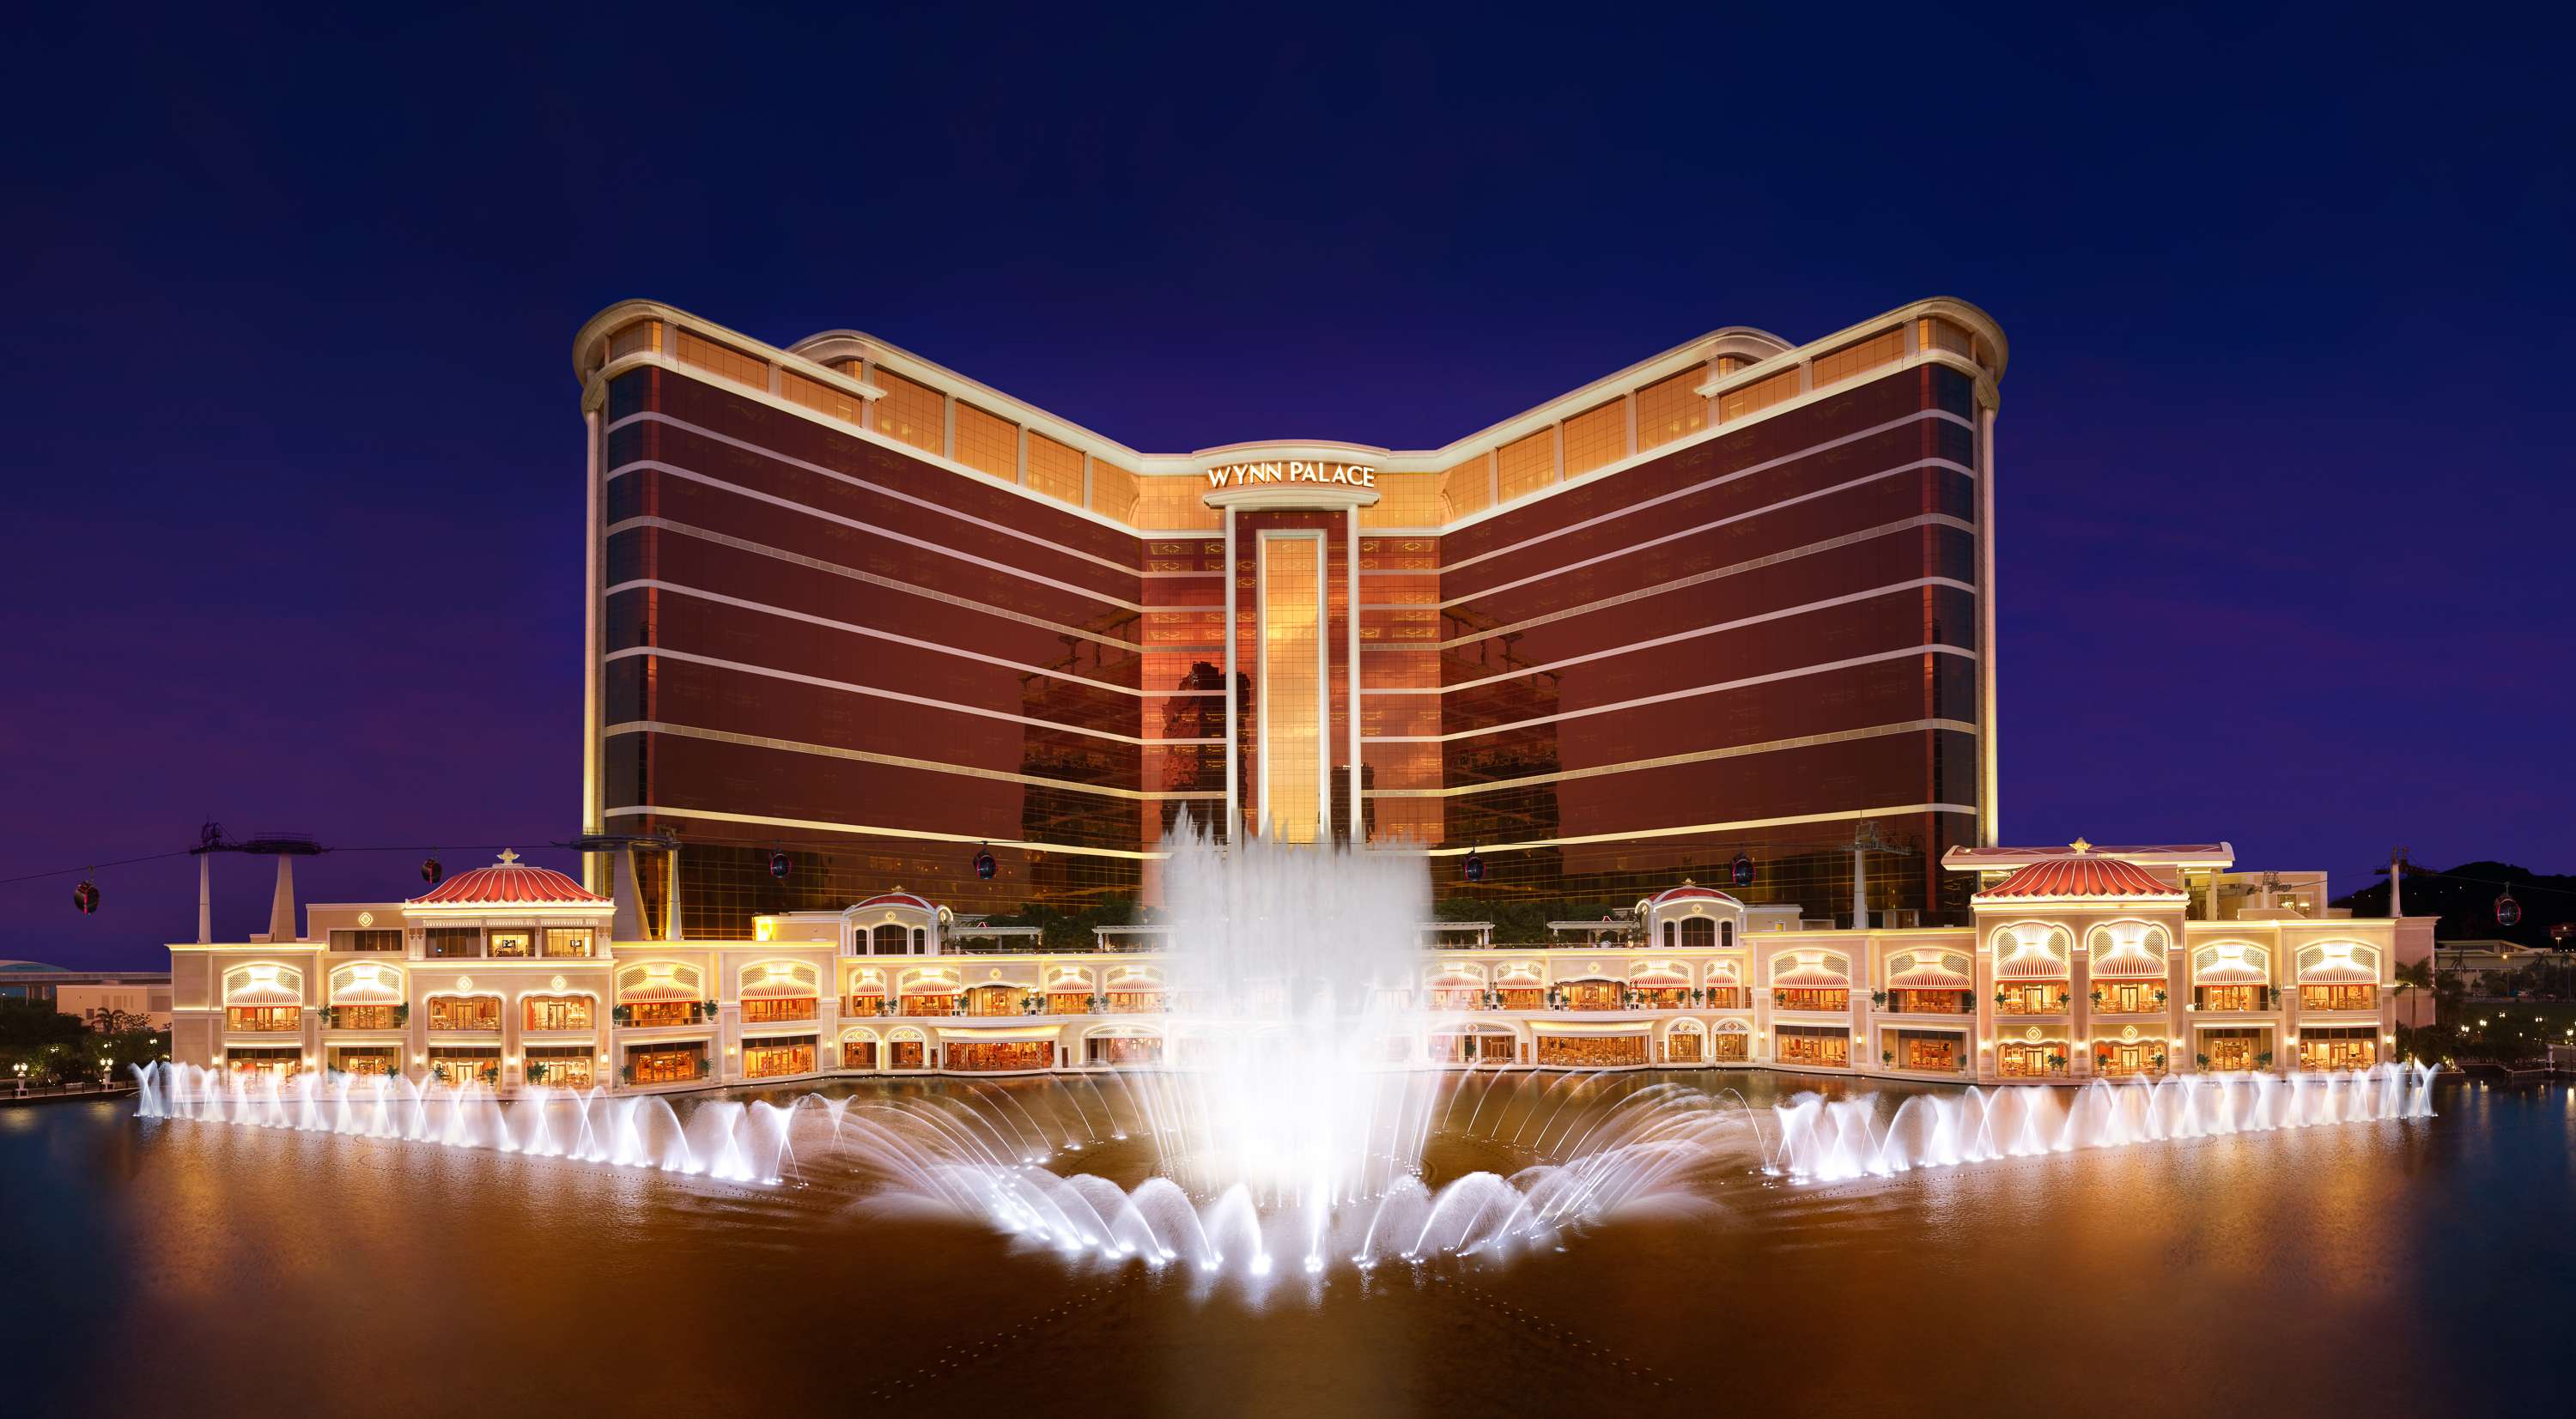 Wynn Palace is open for business.